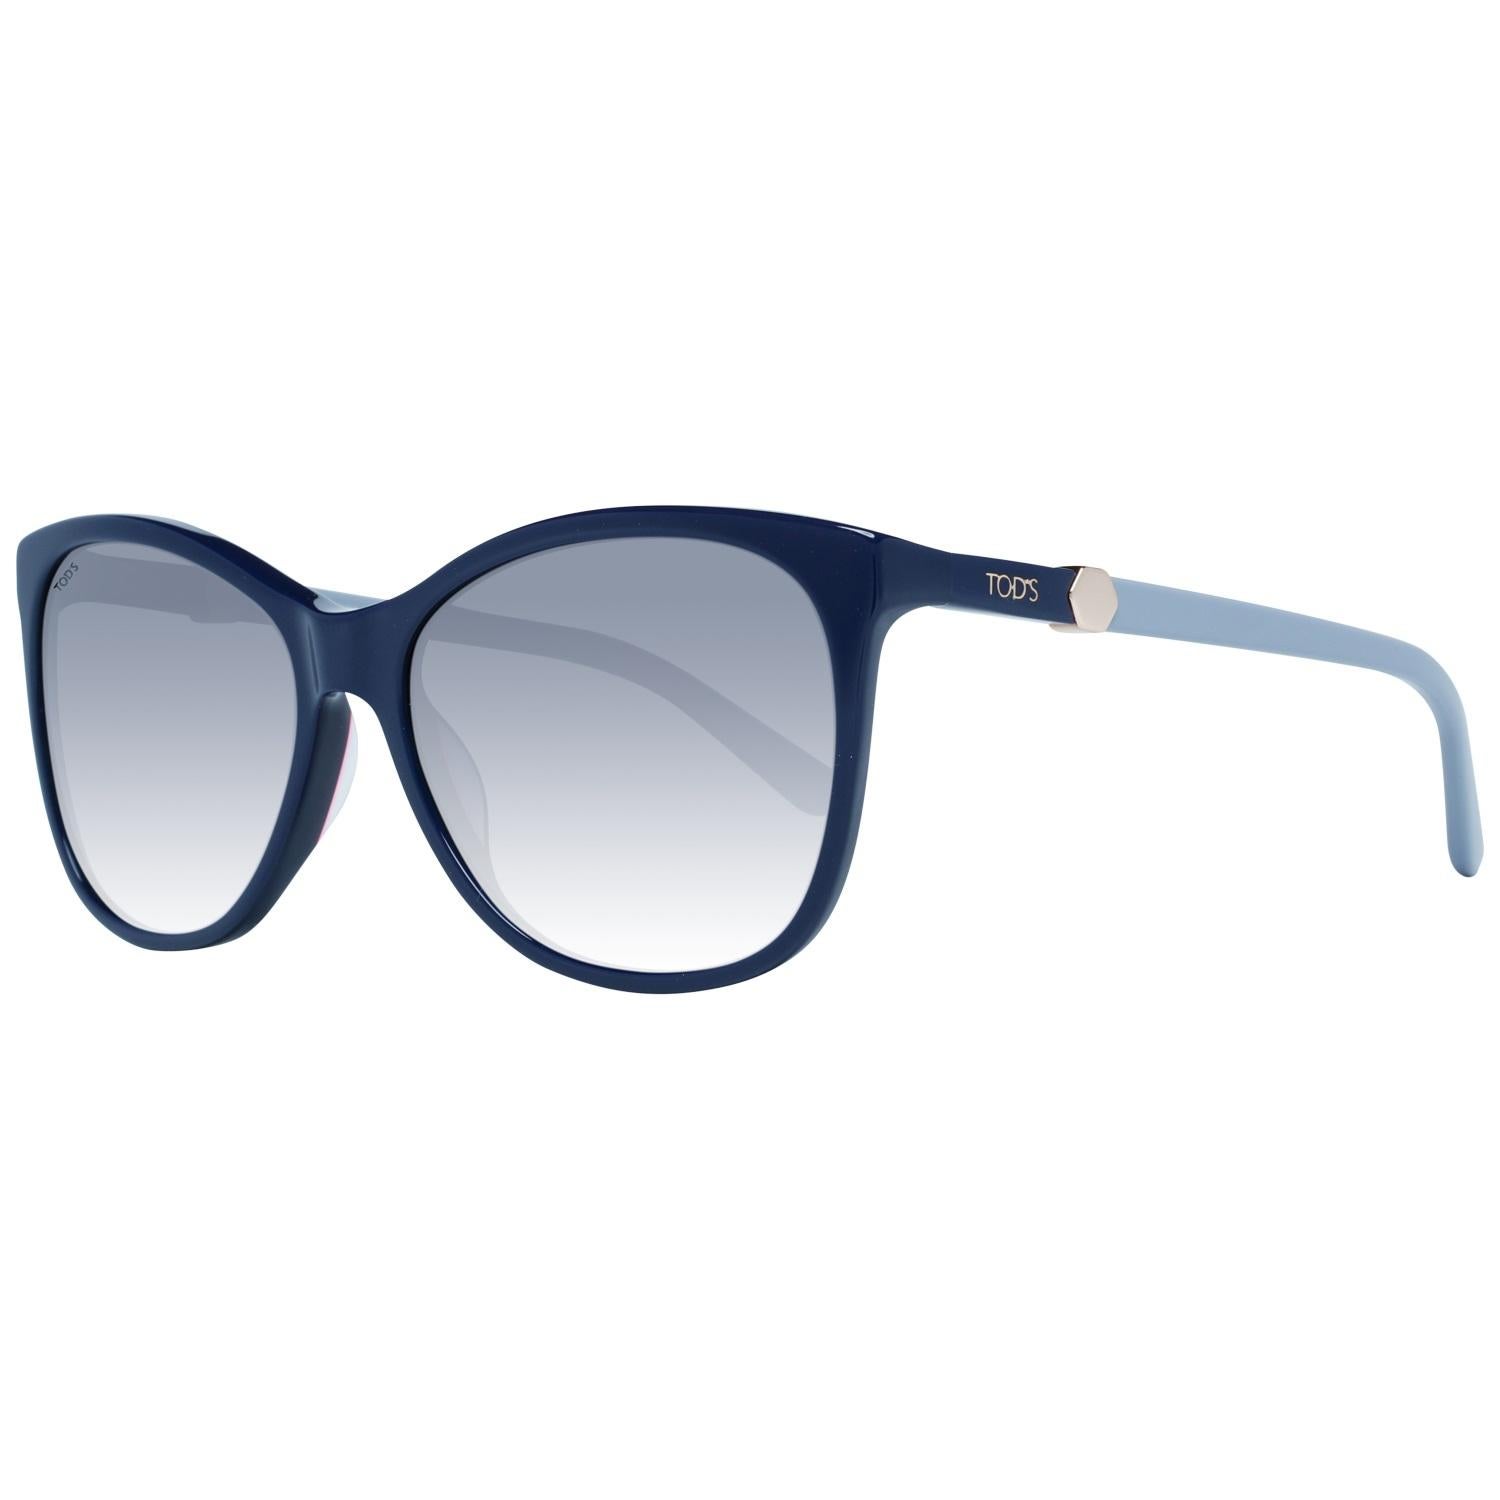 Details

MATERIAL: Acetate

COLOR: Blue

MODEL: TO0175 5790W

GENDER: Women

COUNTRY OF MANUFACTURE: Italy

TYPE: Sunglasses

ORIGINAL CASE?: Yes

STYLE: Oval

OCCASION: Casual

FEATURES: Lightweight

LENS COLOR: Grey

LENS TECHNOLOGY: